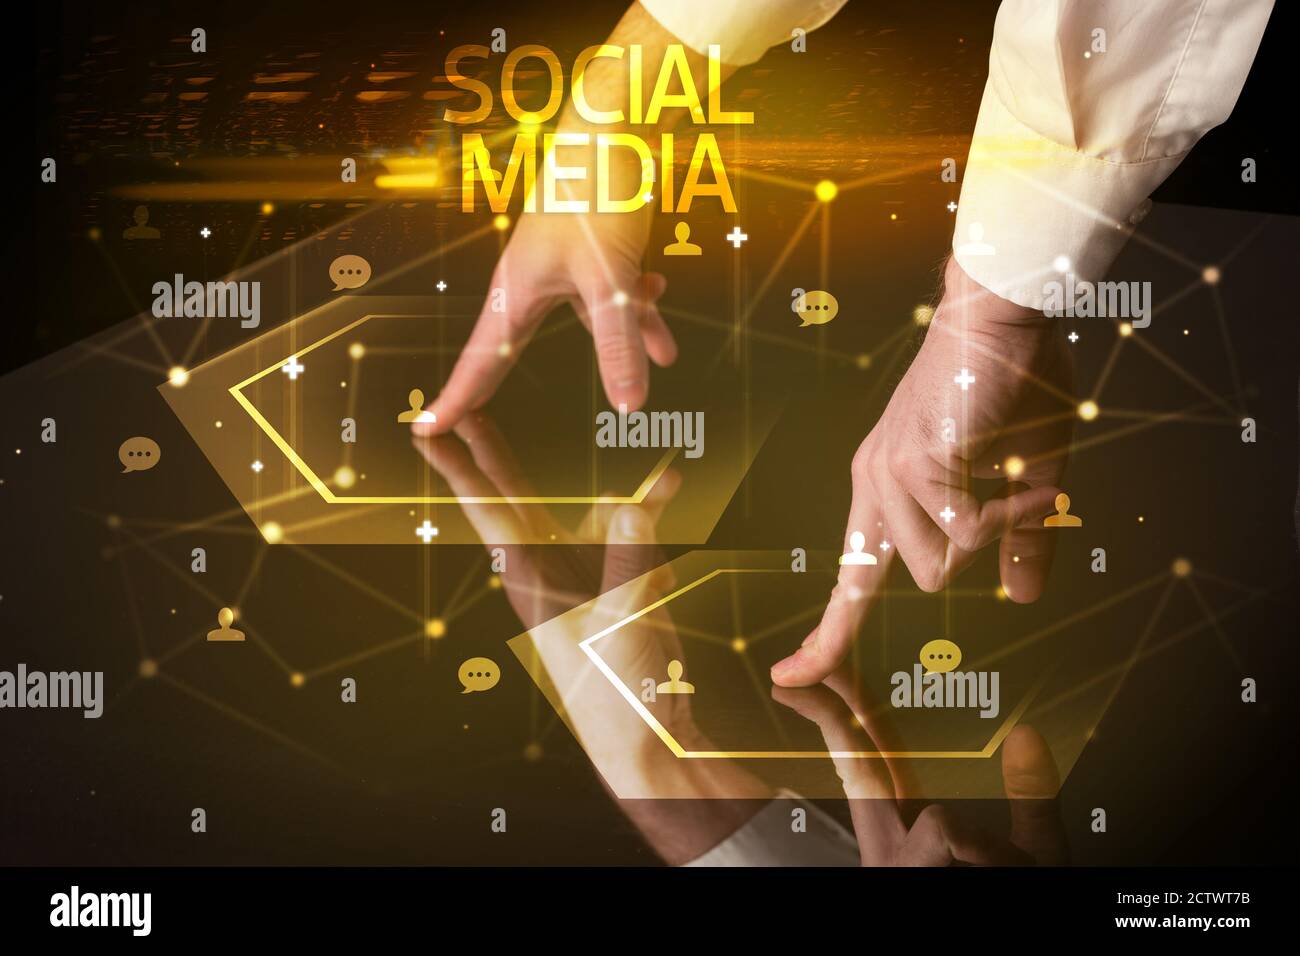 Navigating social networking with SOCIAL MEDIA inscription, new media concept Stock Photo